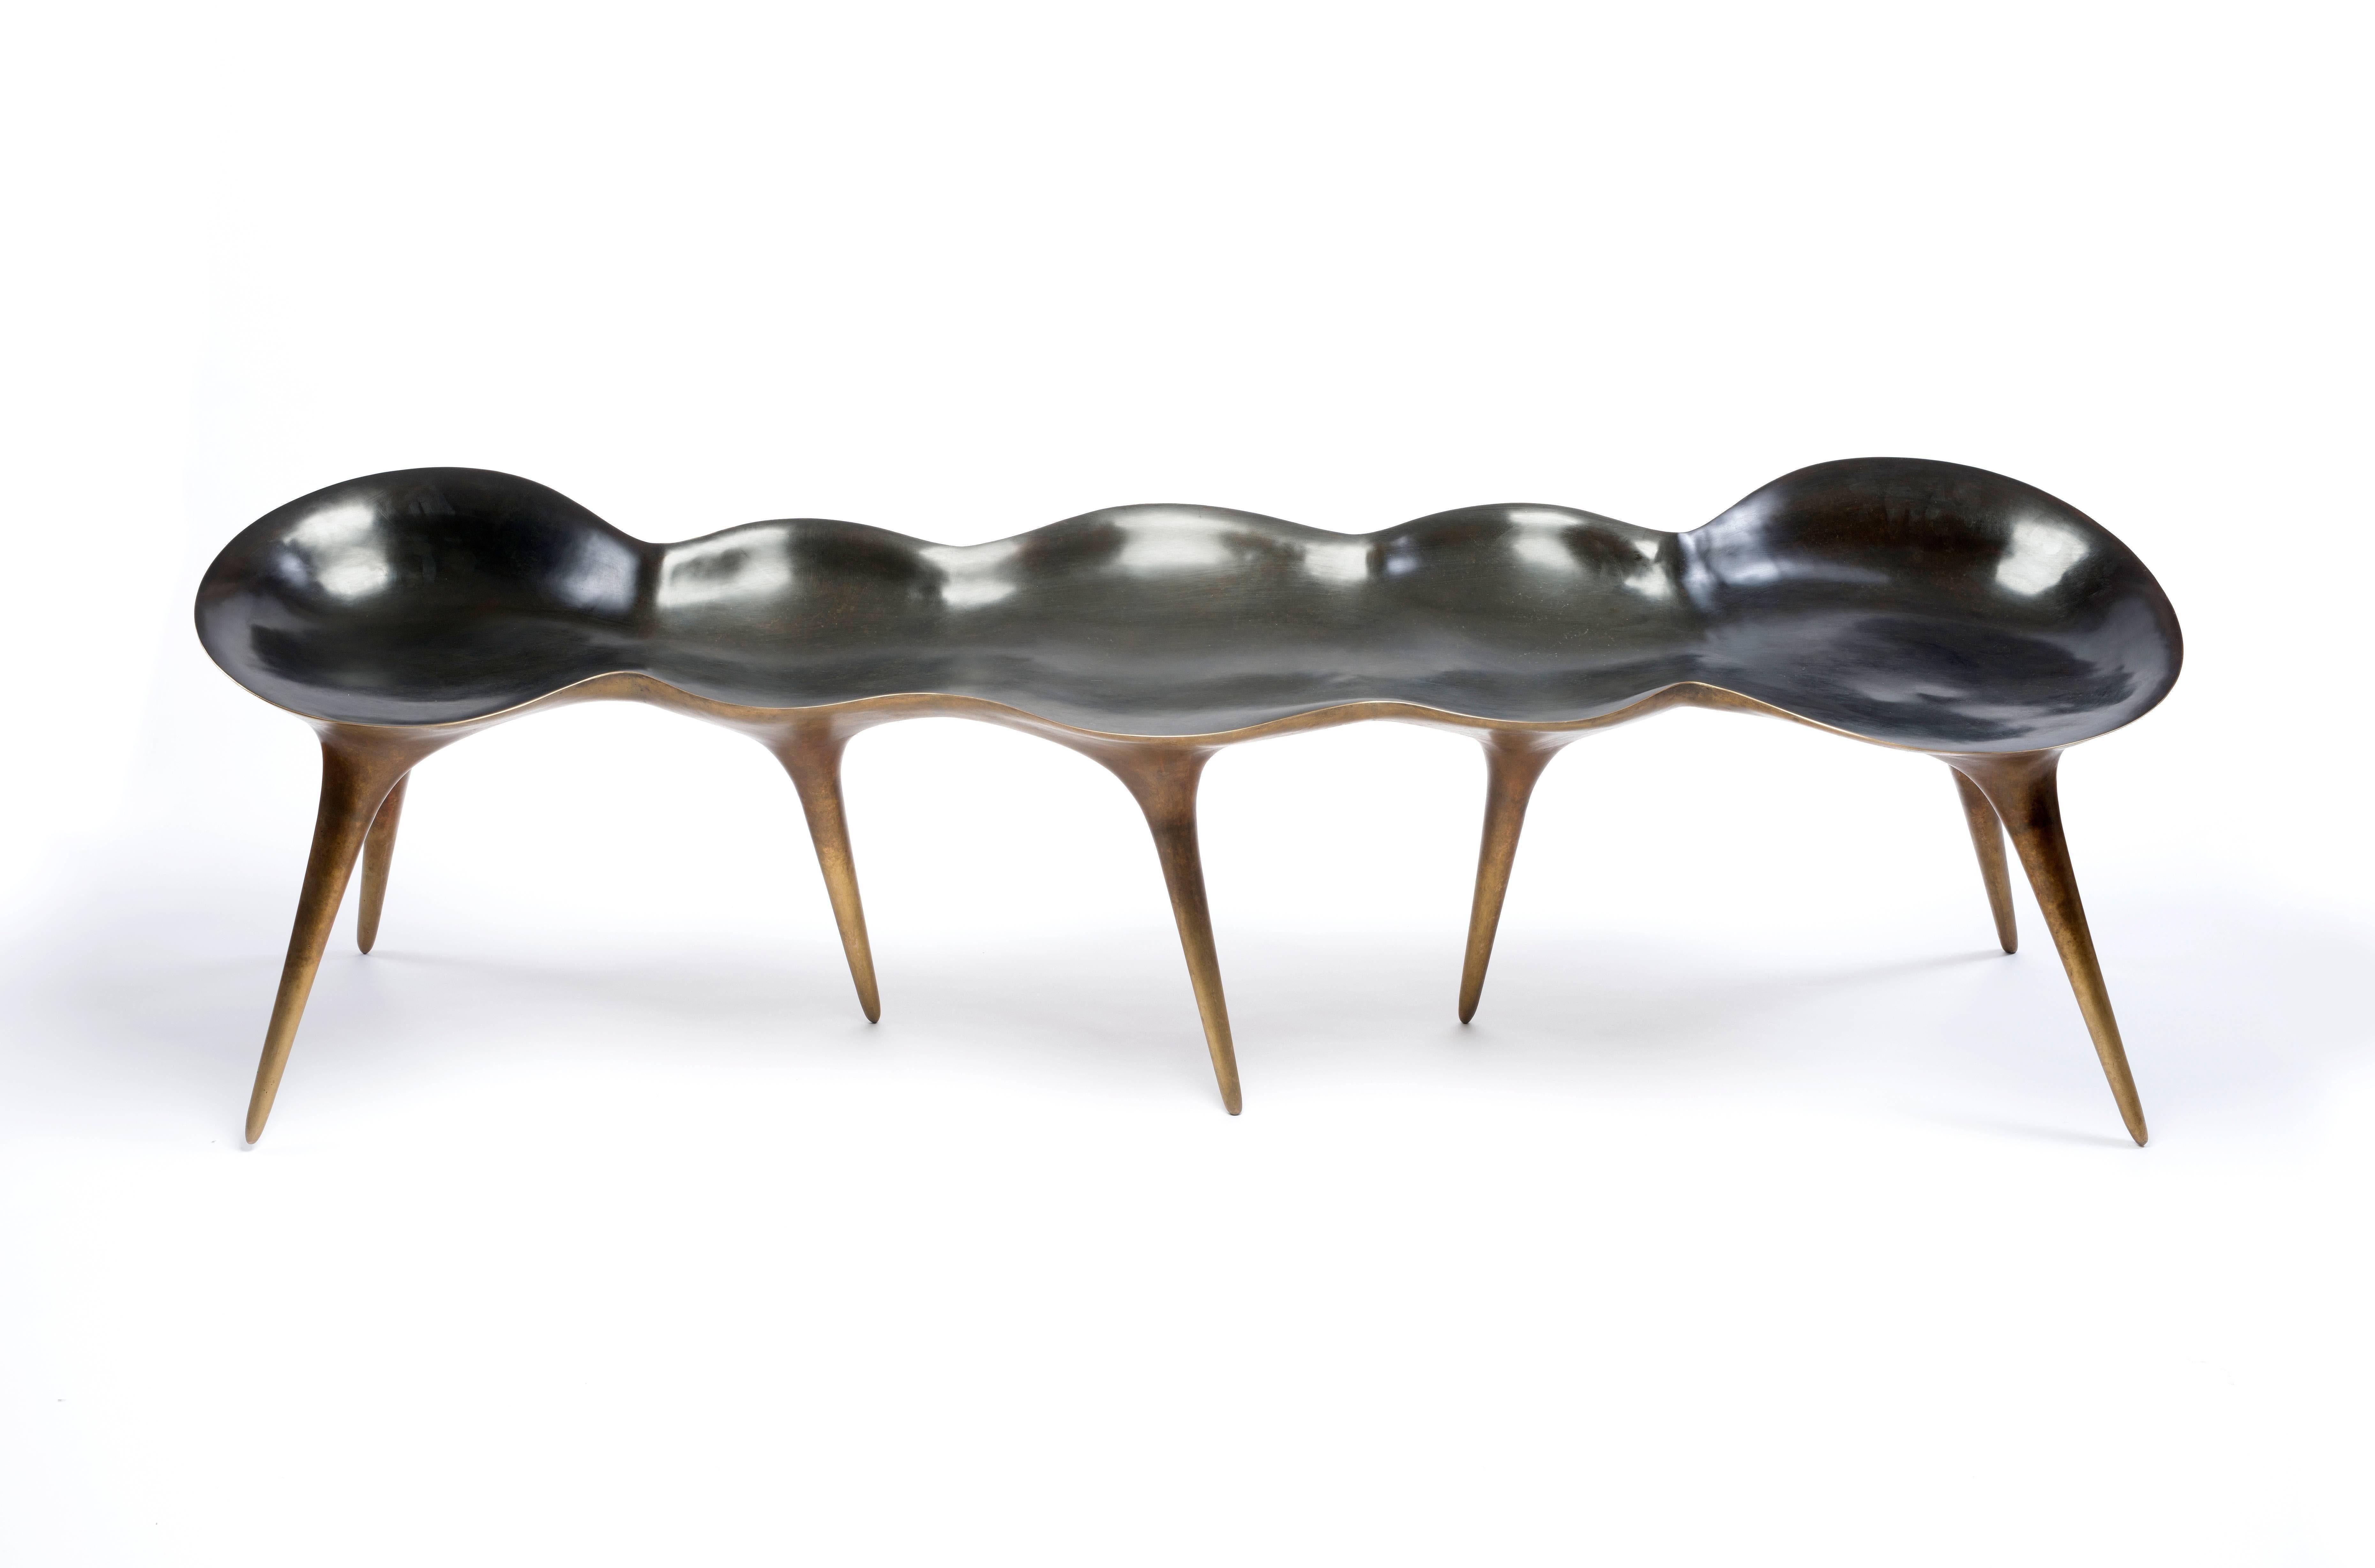 Cast bronze bench with mirror polished finish. Custom benches can be ordered with different finishes. 

Timothy Schreiber initially trained in cabinet making in Germany before studying architecture and design at Bauhaus University, Weimar